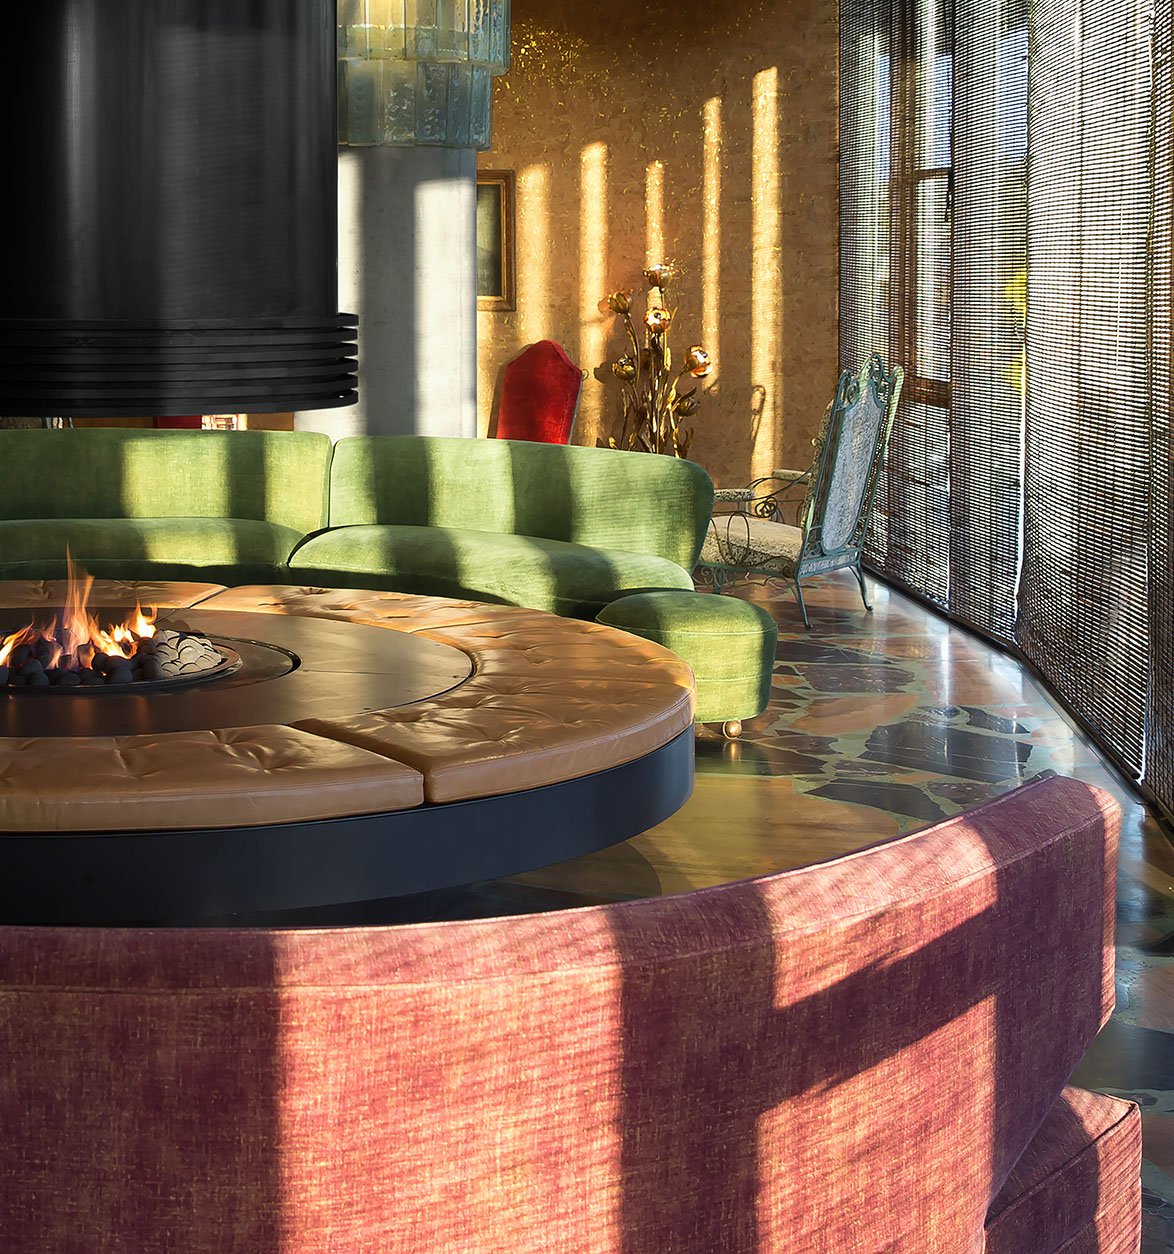 THE IN-THE-ROUND FIREPLACE